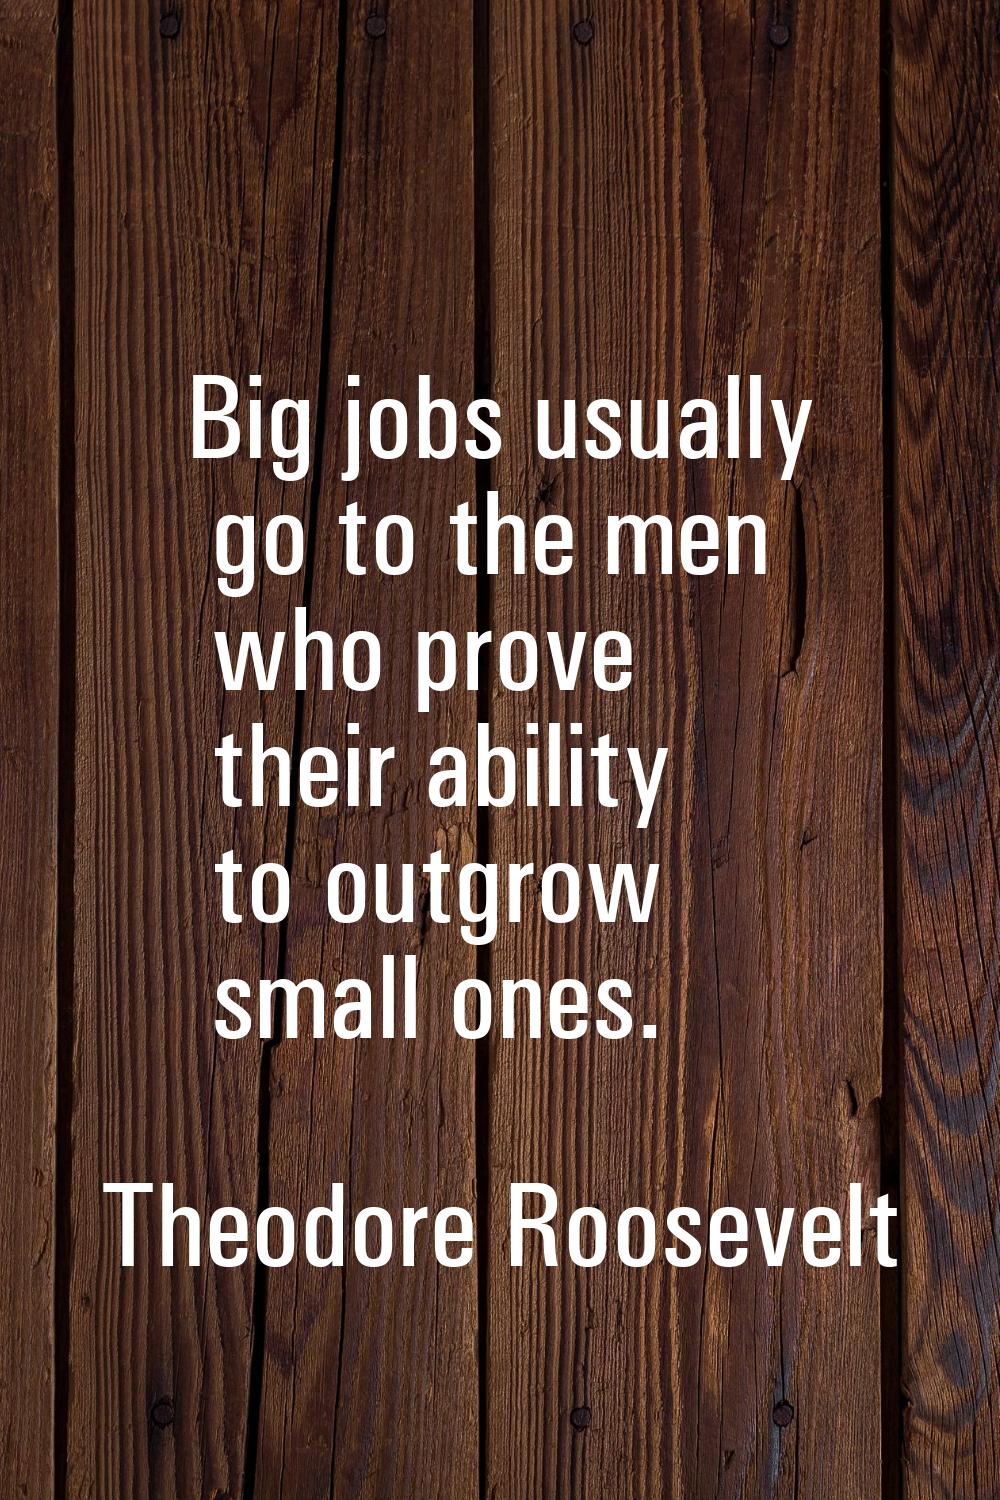 Big jobs usually go to the men who prove their ability to outgrow small ones.